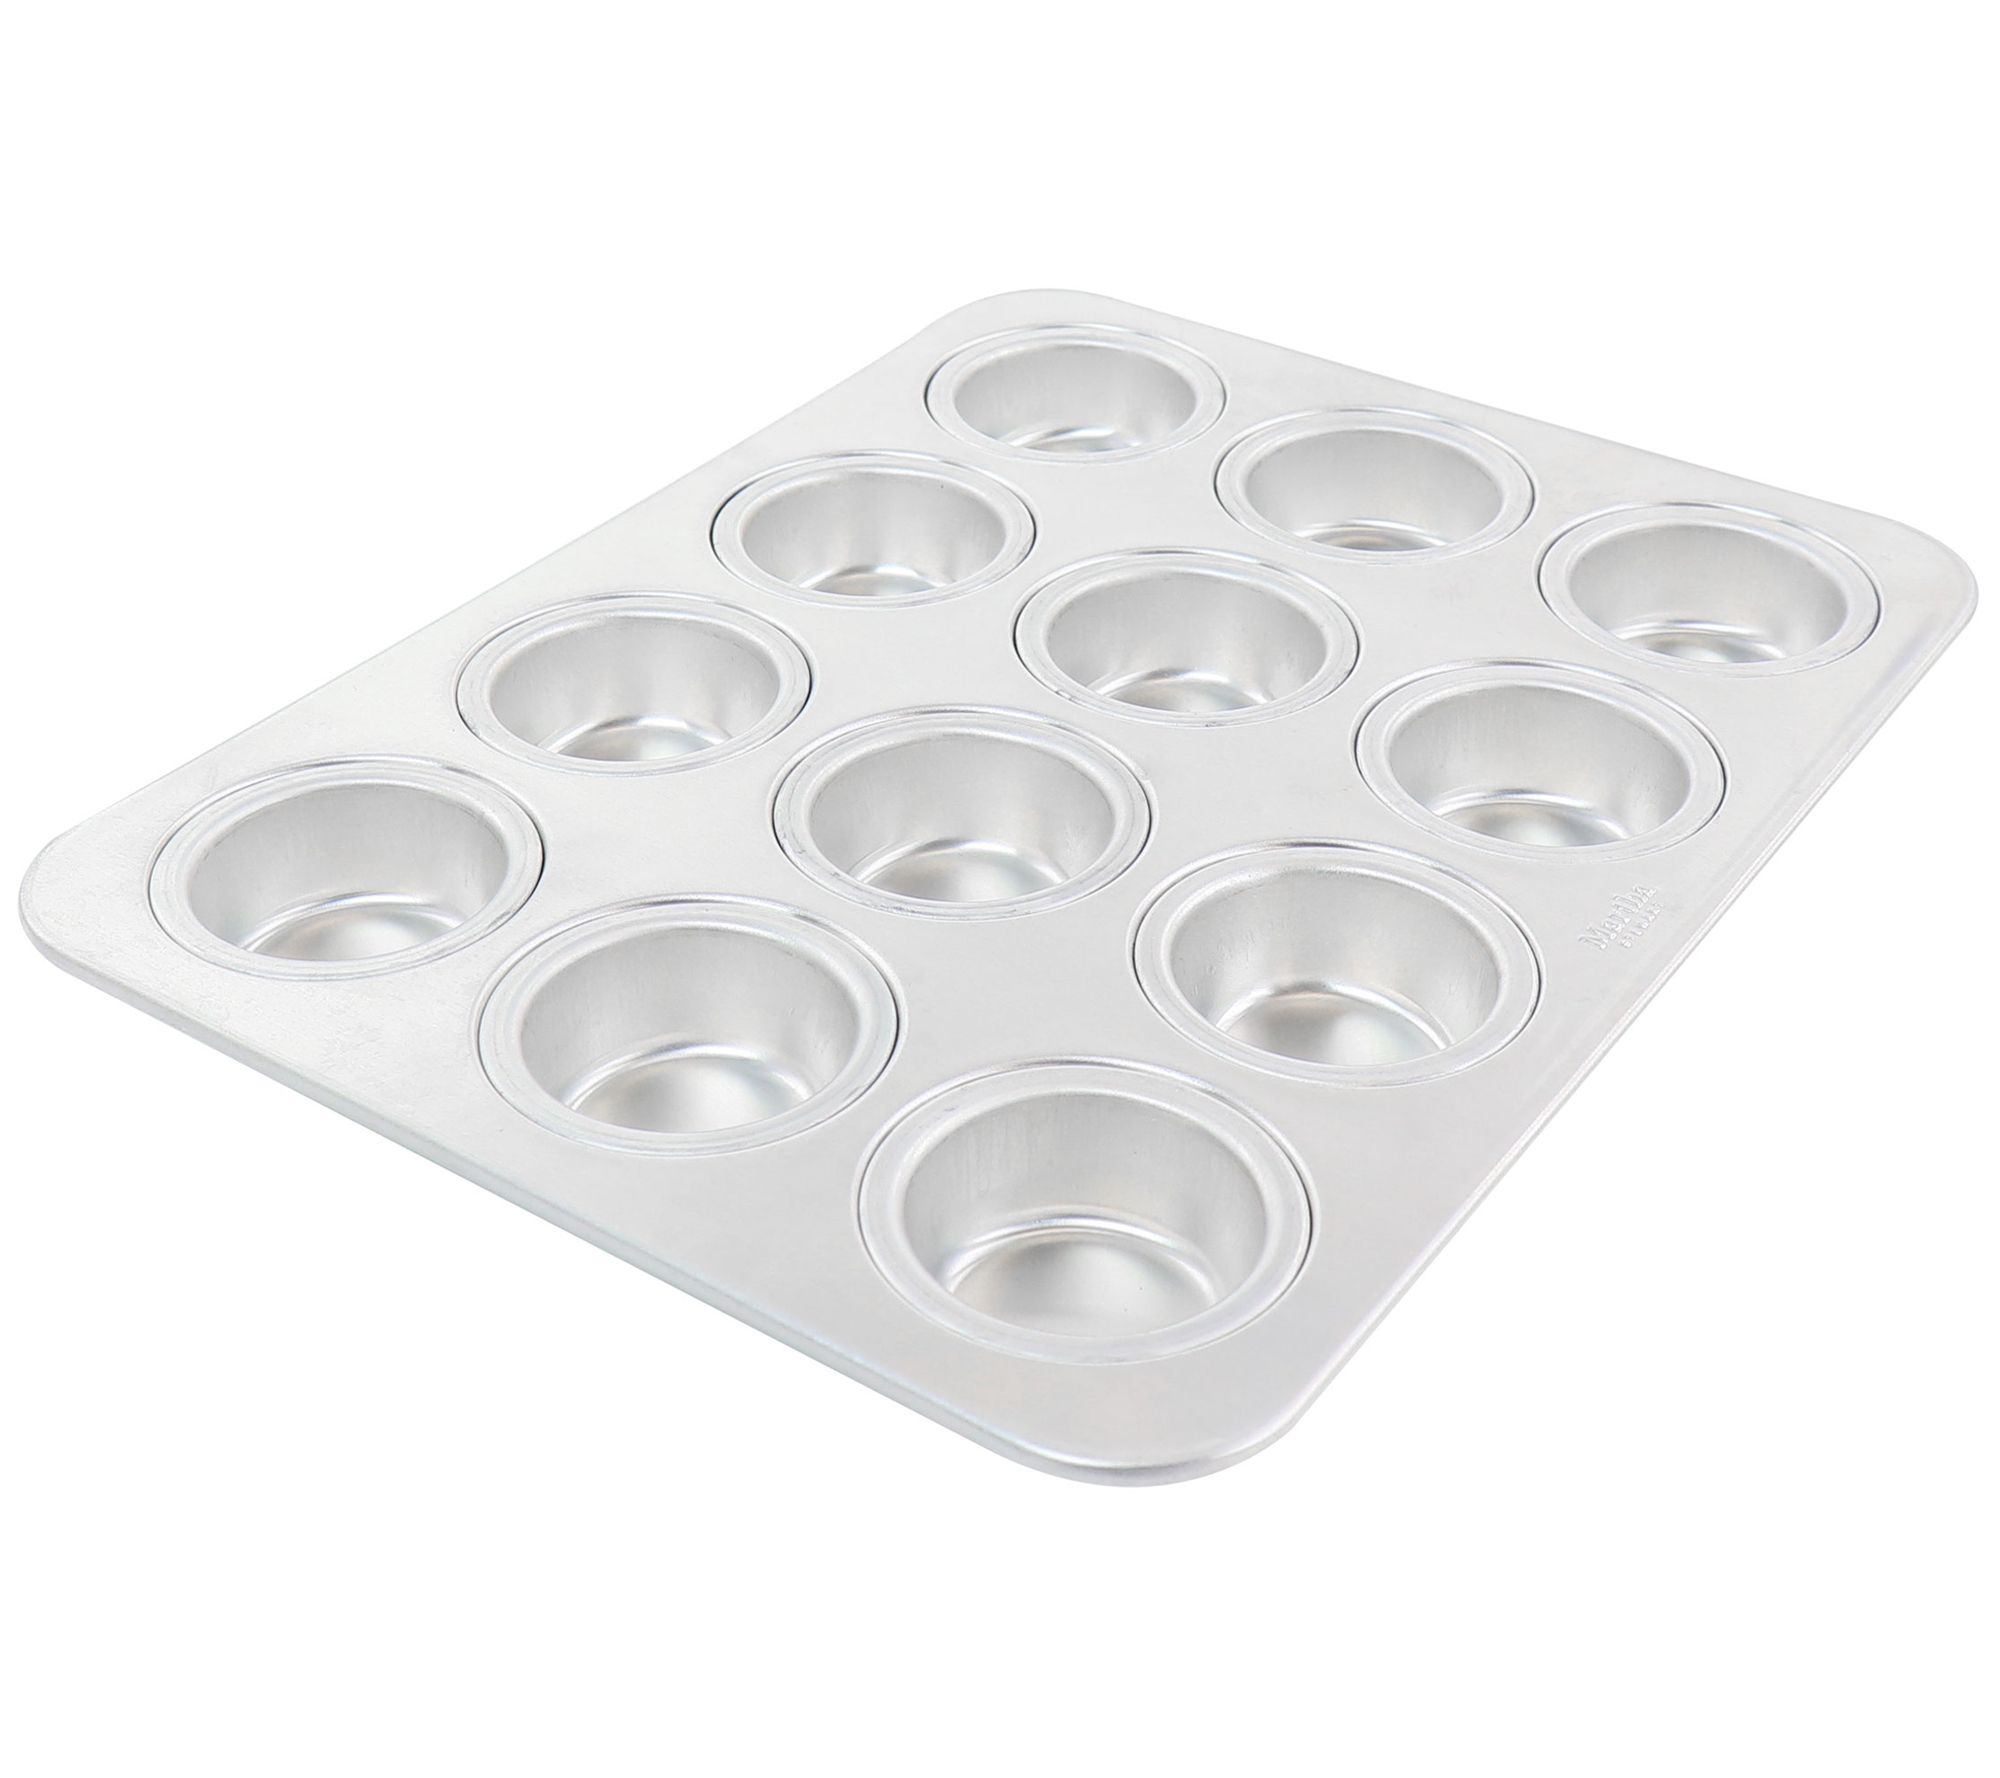 Temp-tations 1-Cup Texas Sized Muffin Pan on QVC 